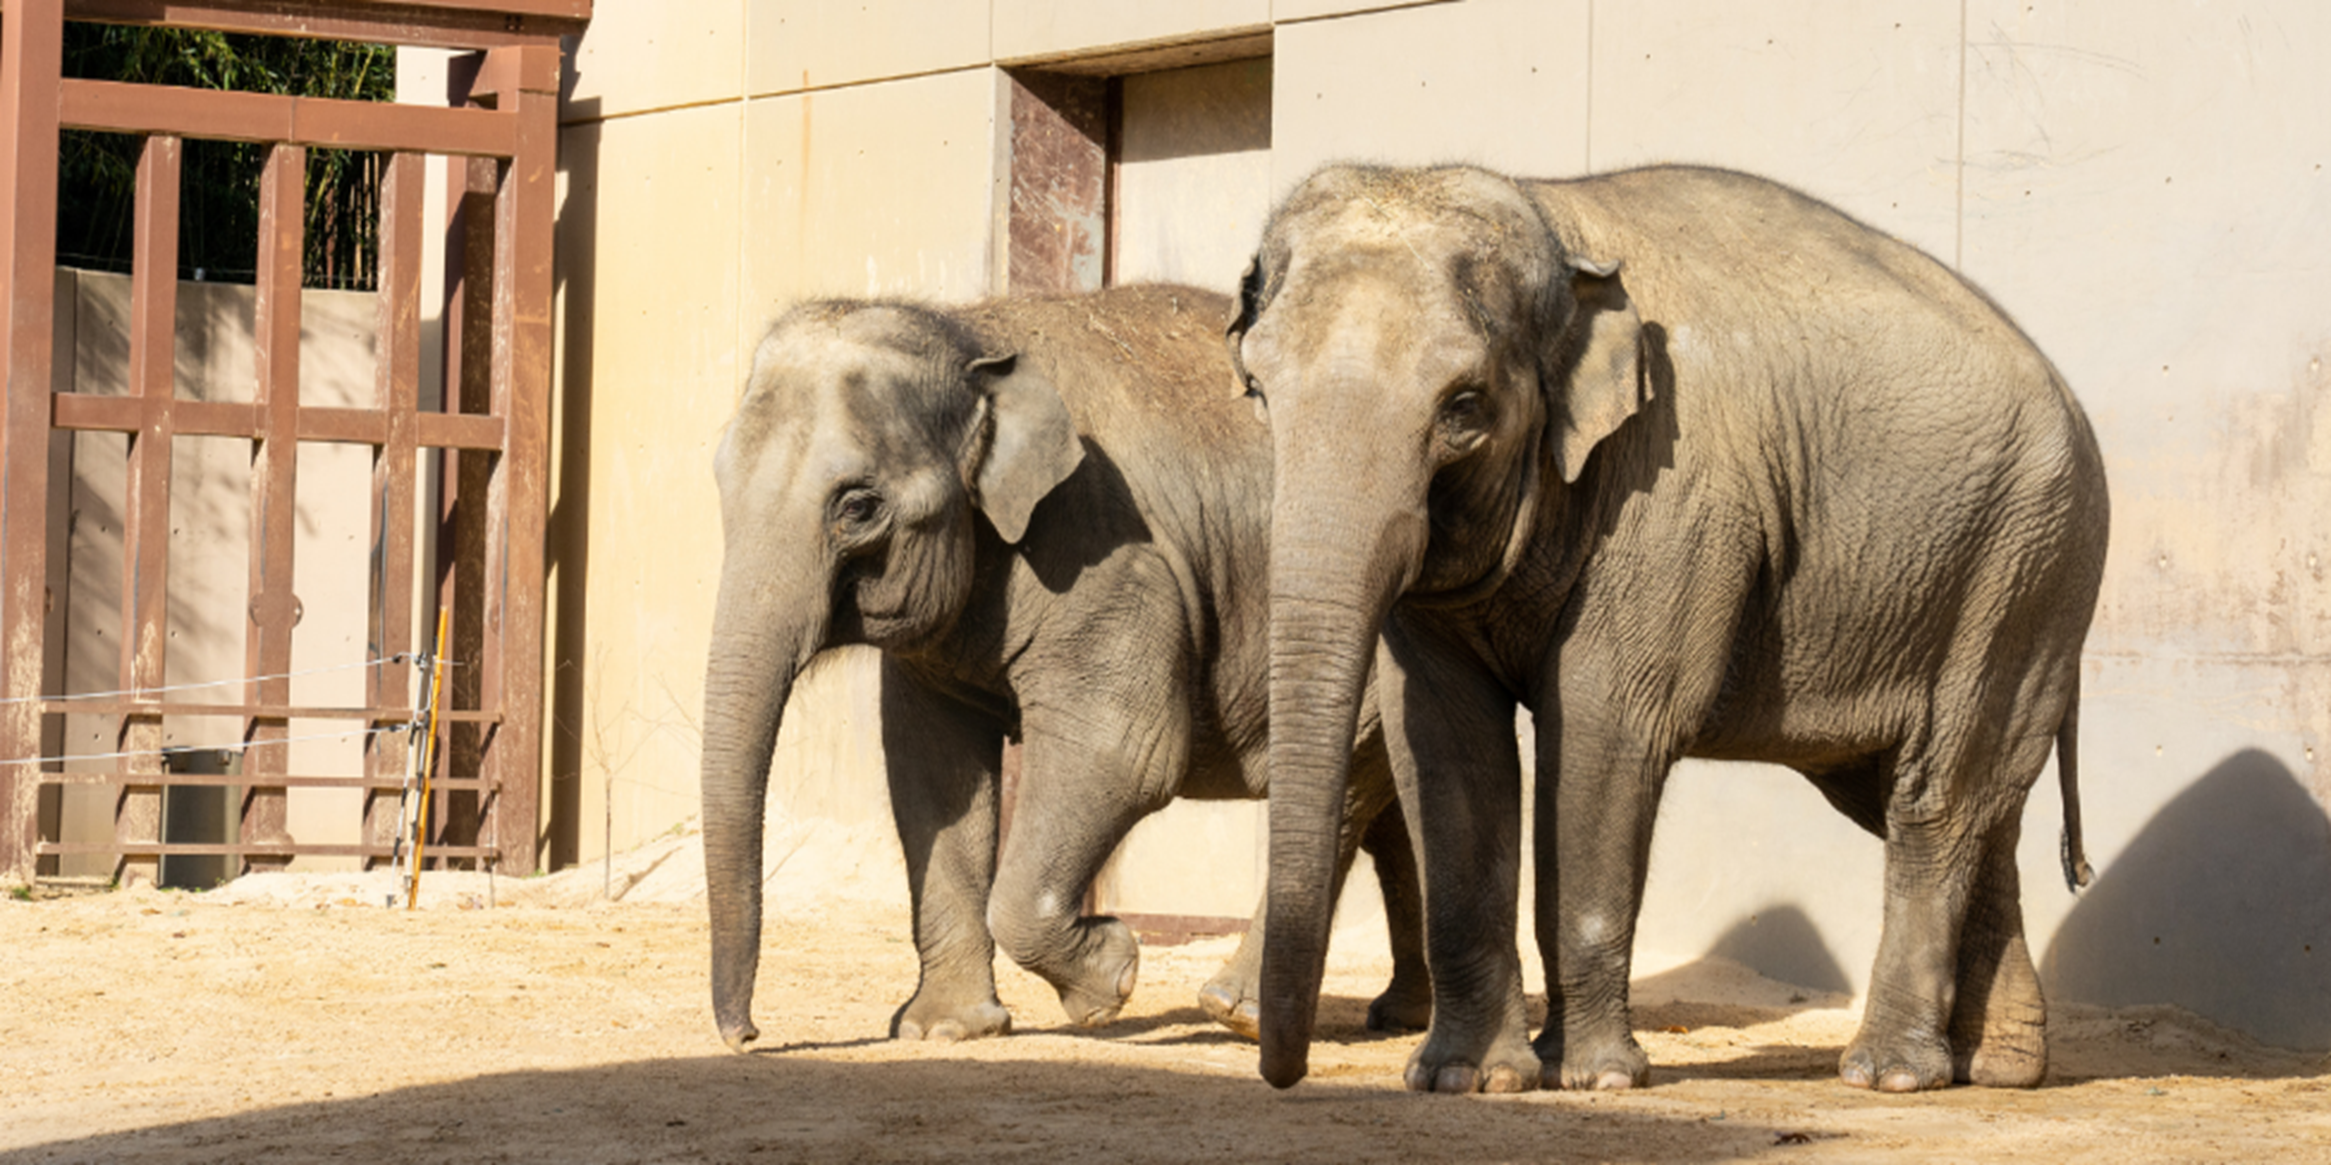 Two elephants stand next to each other in their zoo enclosure